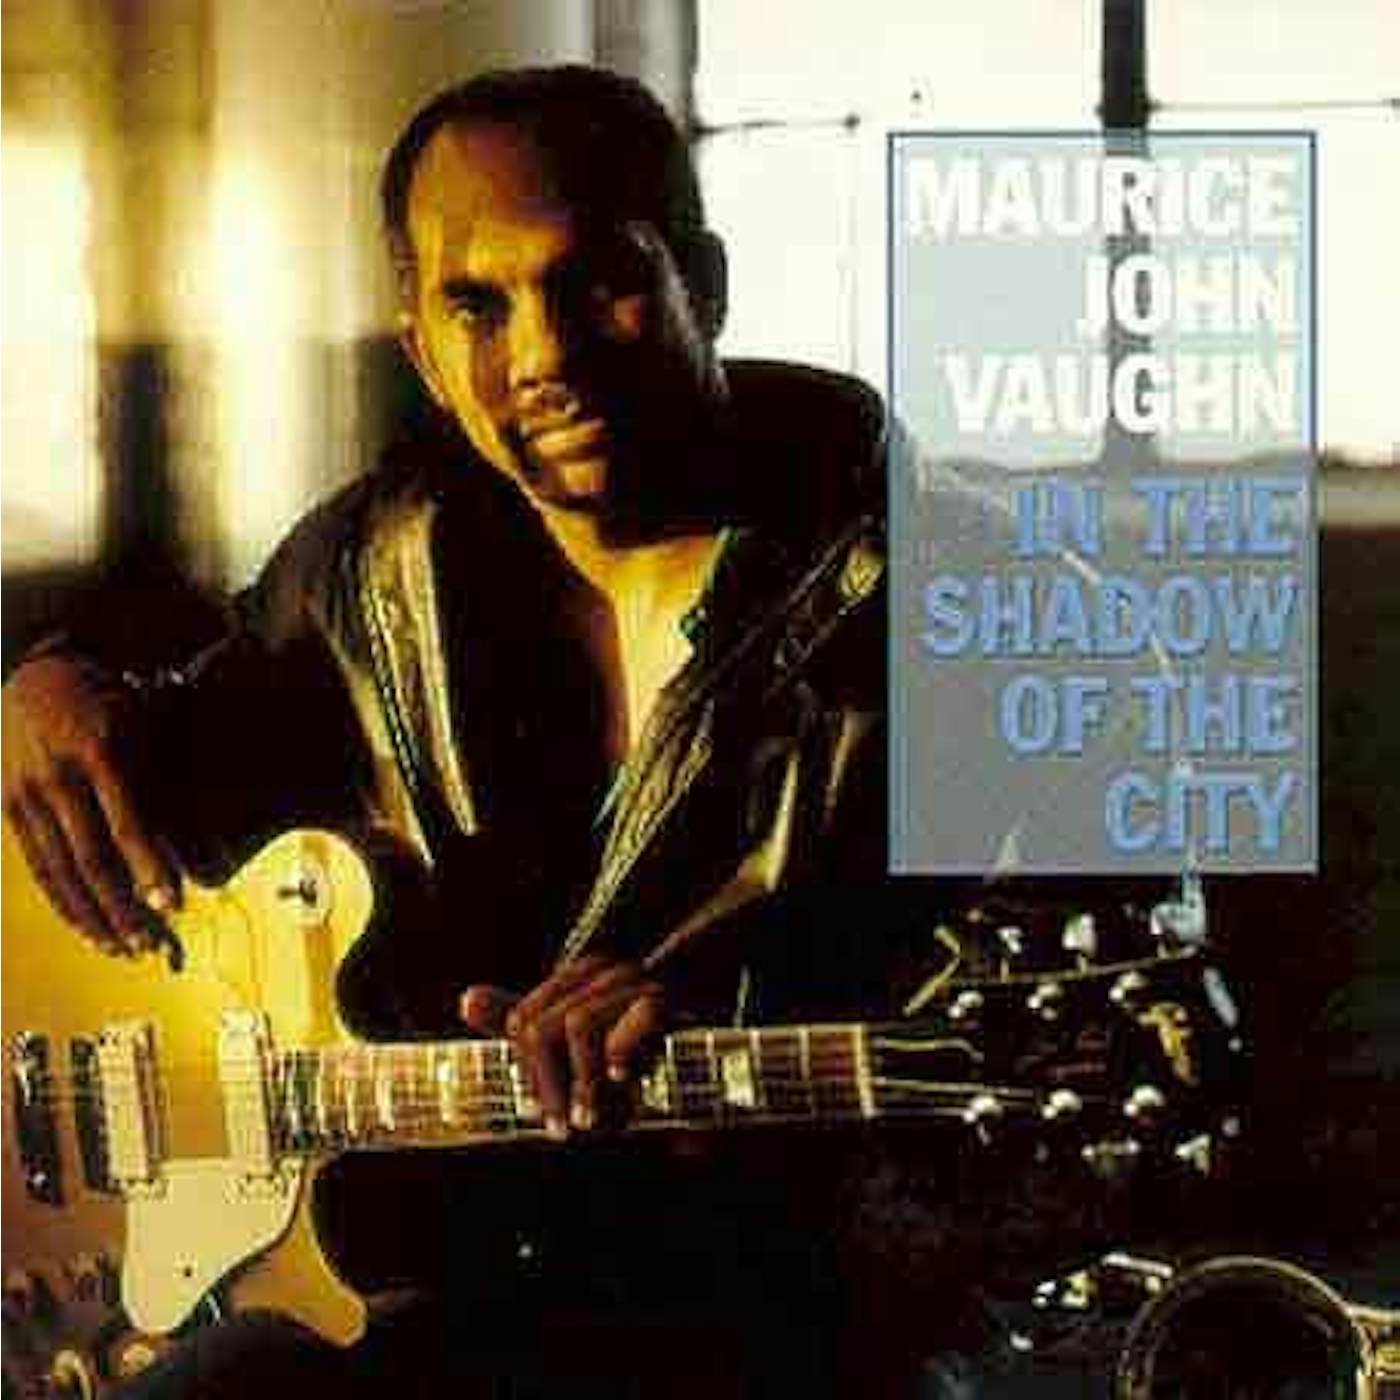 Maurice John Vaughn IN THE SHADOW OF THE CITY CD